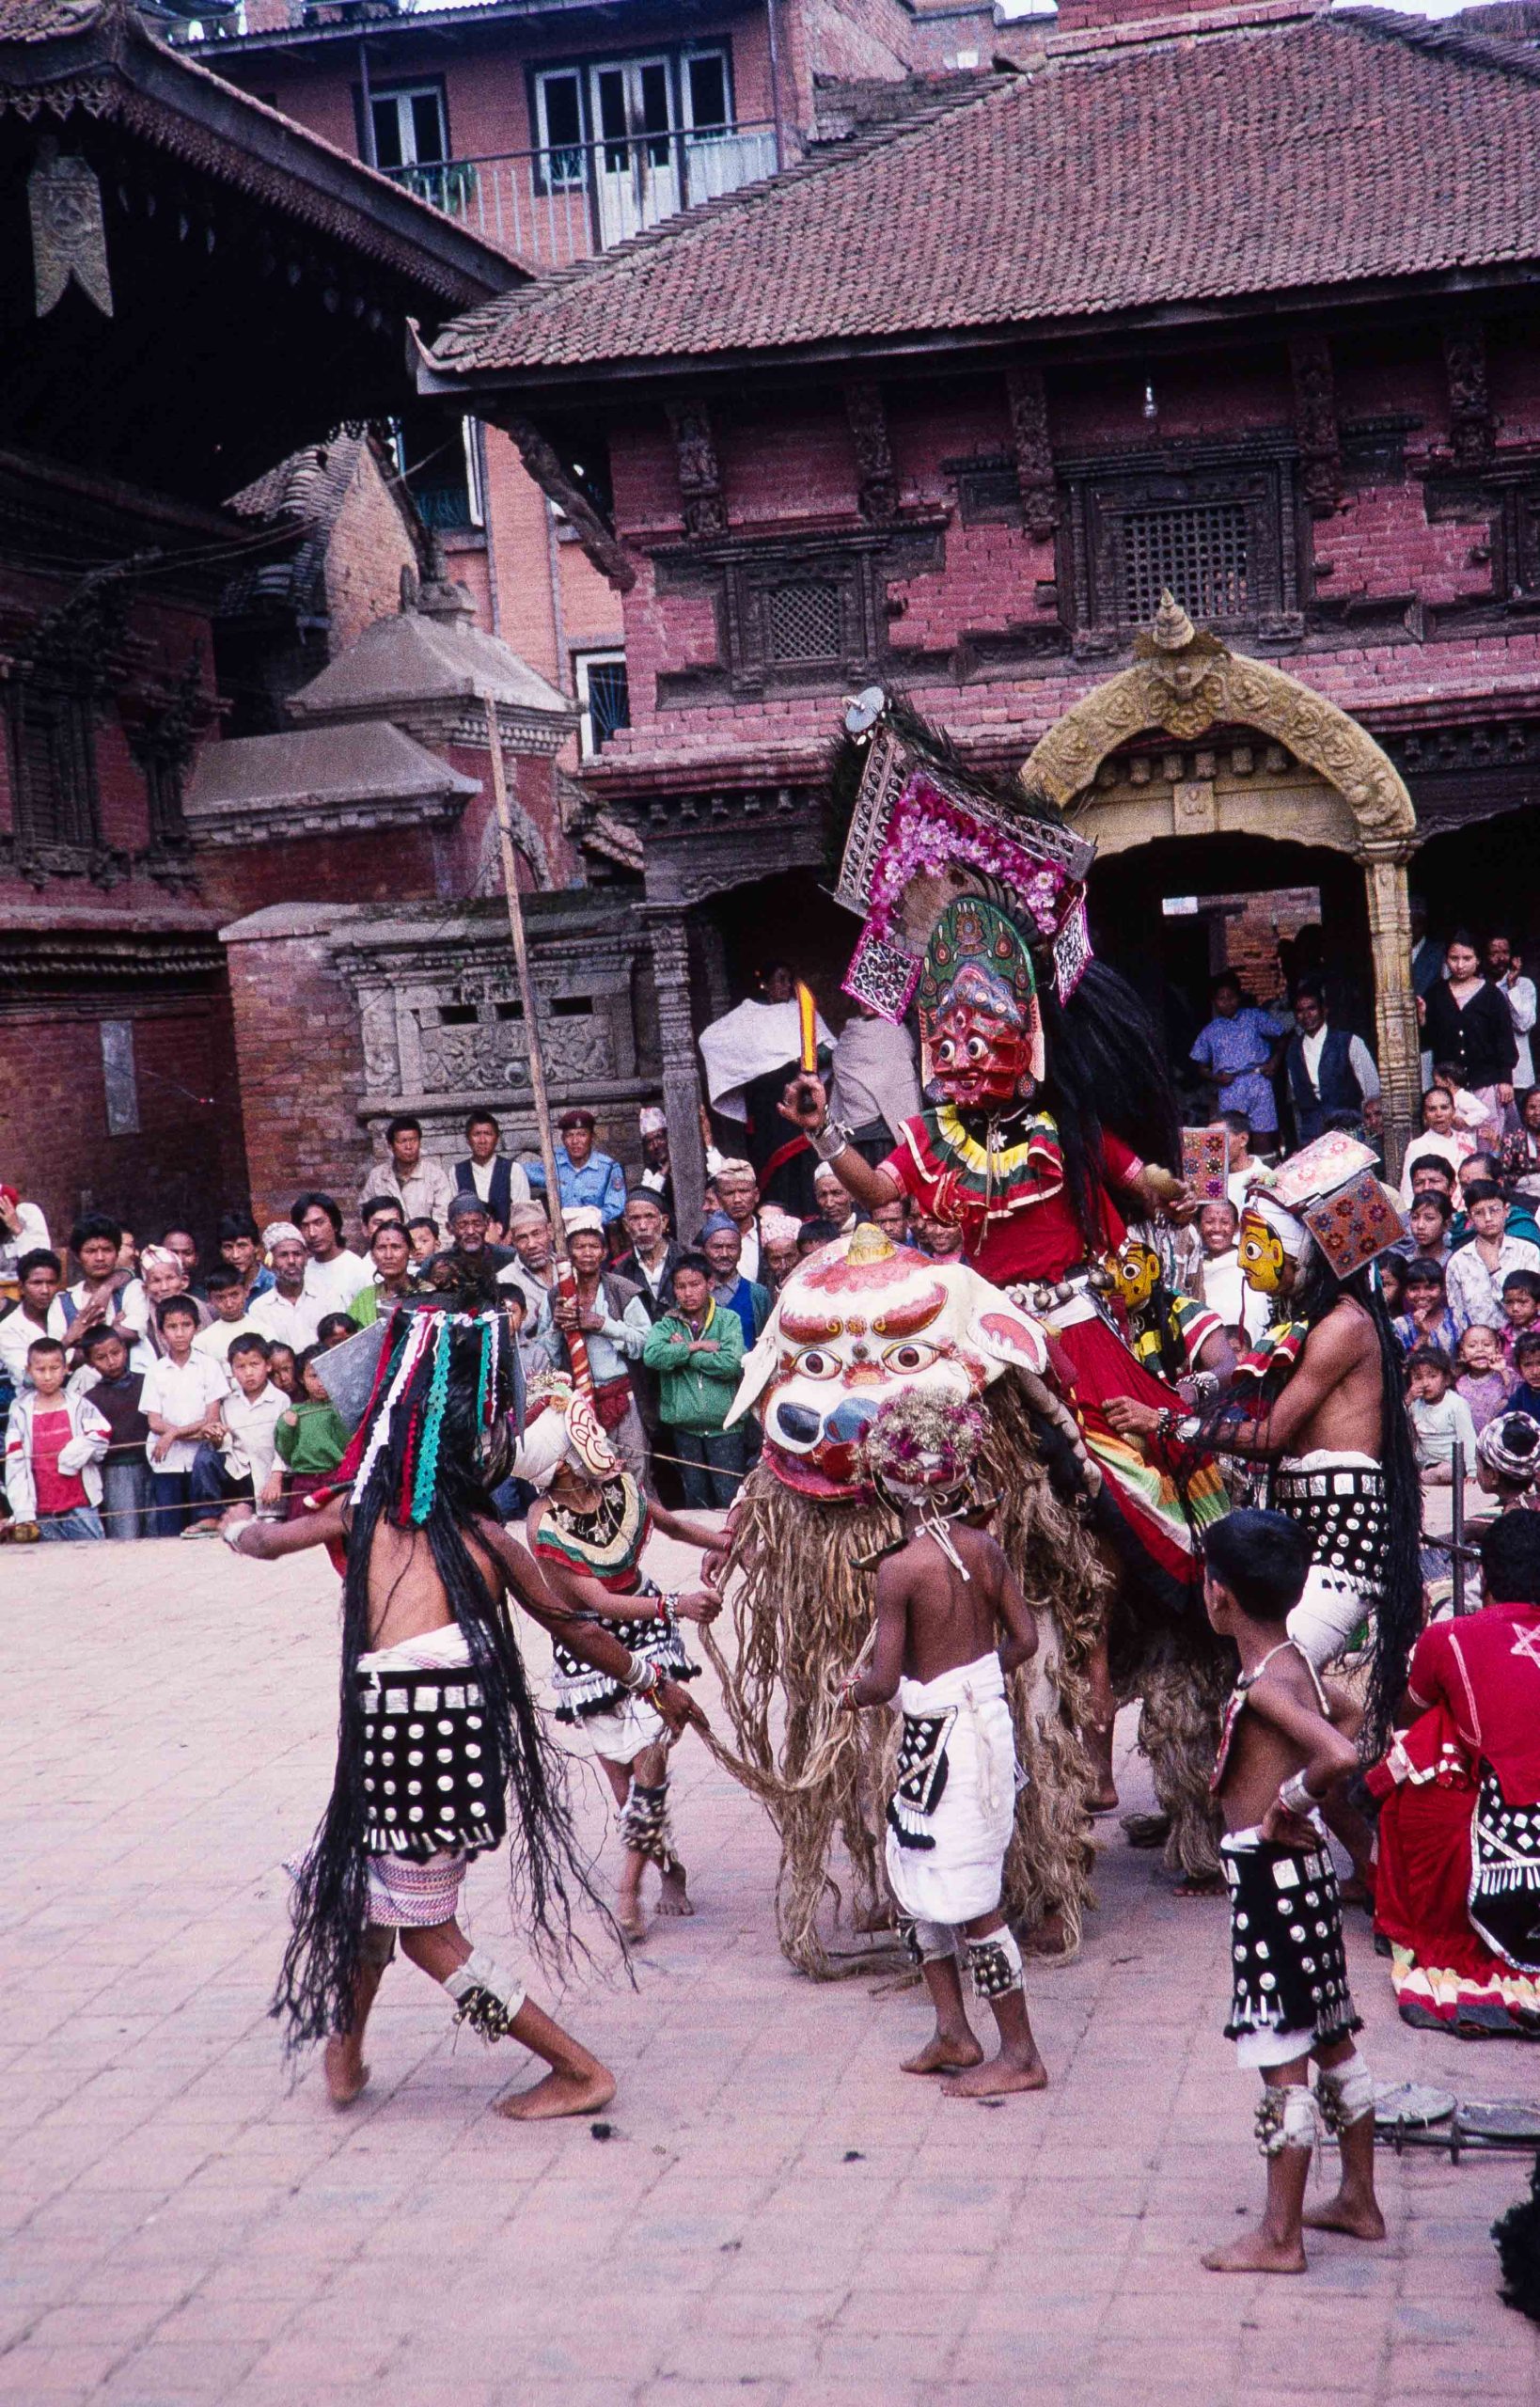 Performing a traditional dance in front of Betal Pati, Taumadhi Square image